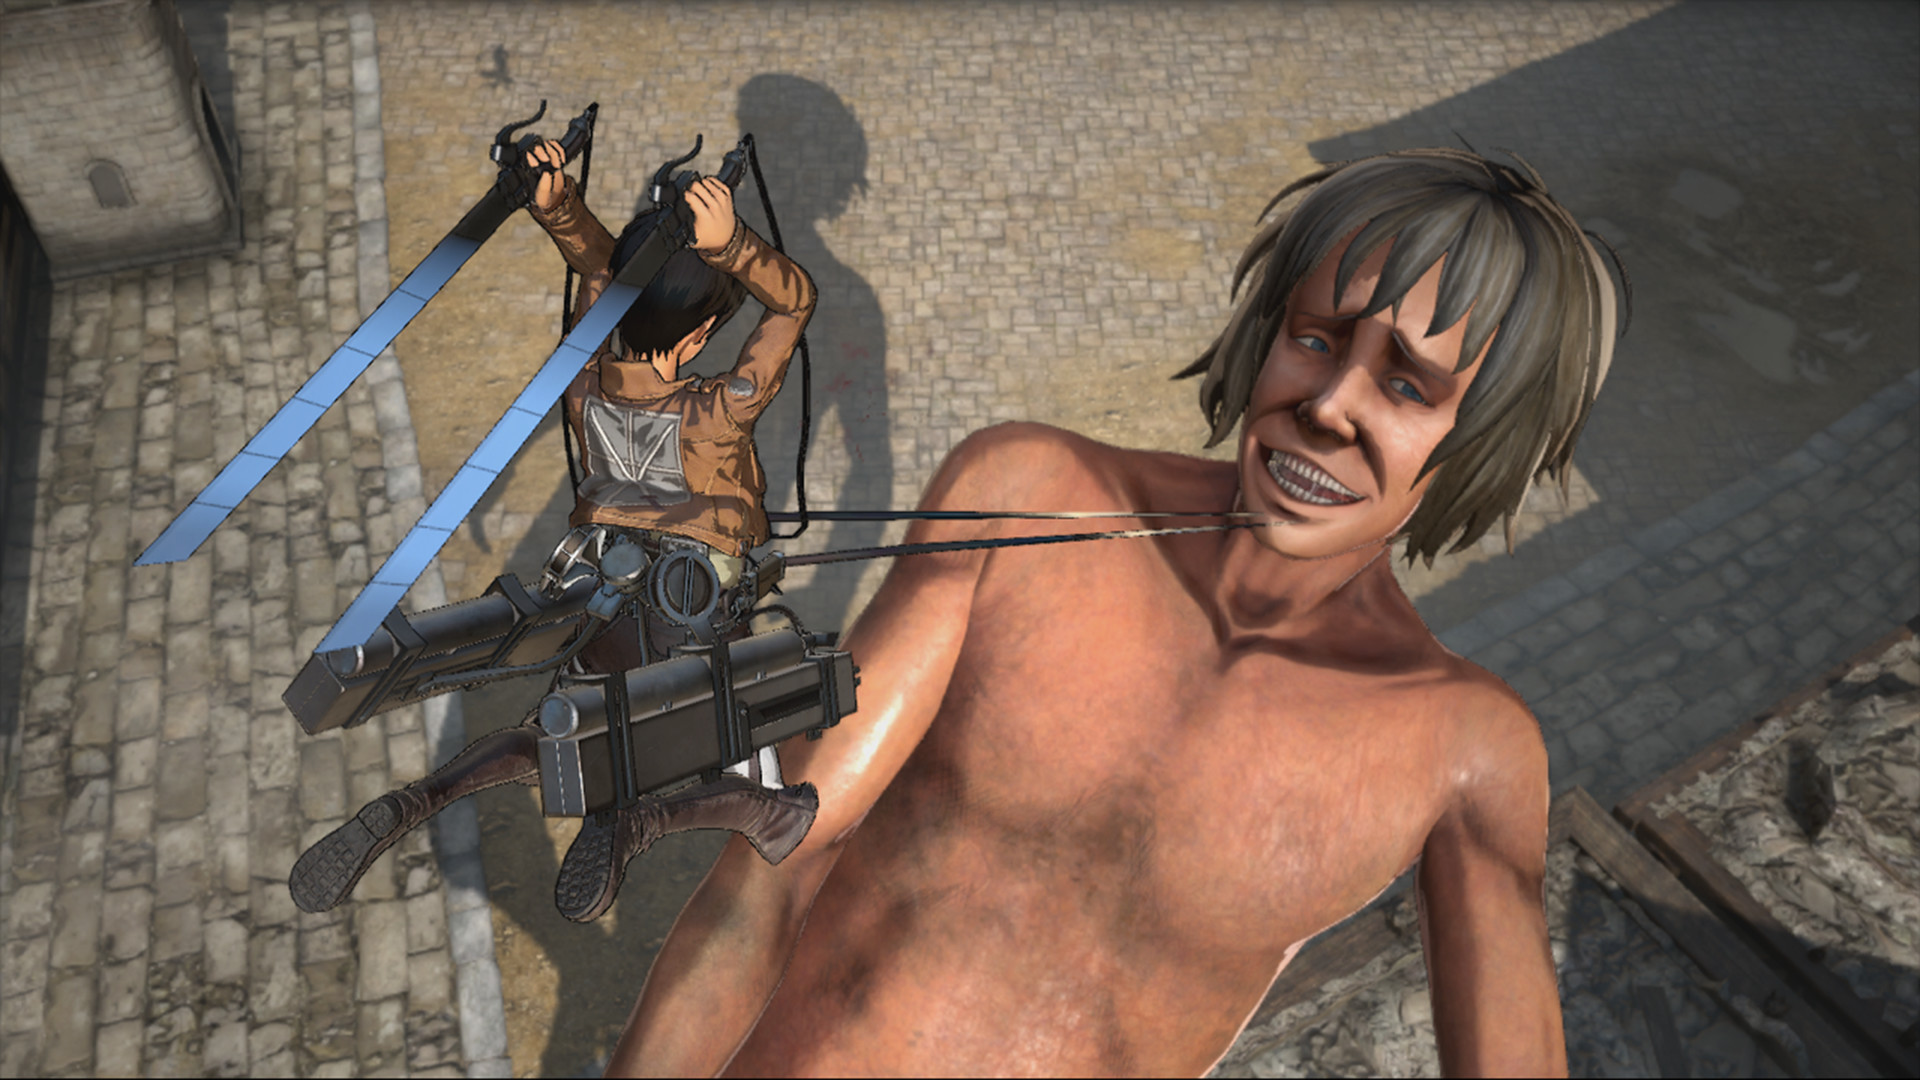 Attack on Titan / A.O.T. Wings of Freedom screenshot